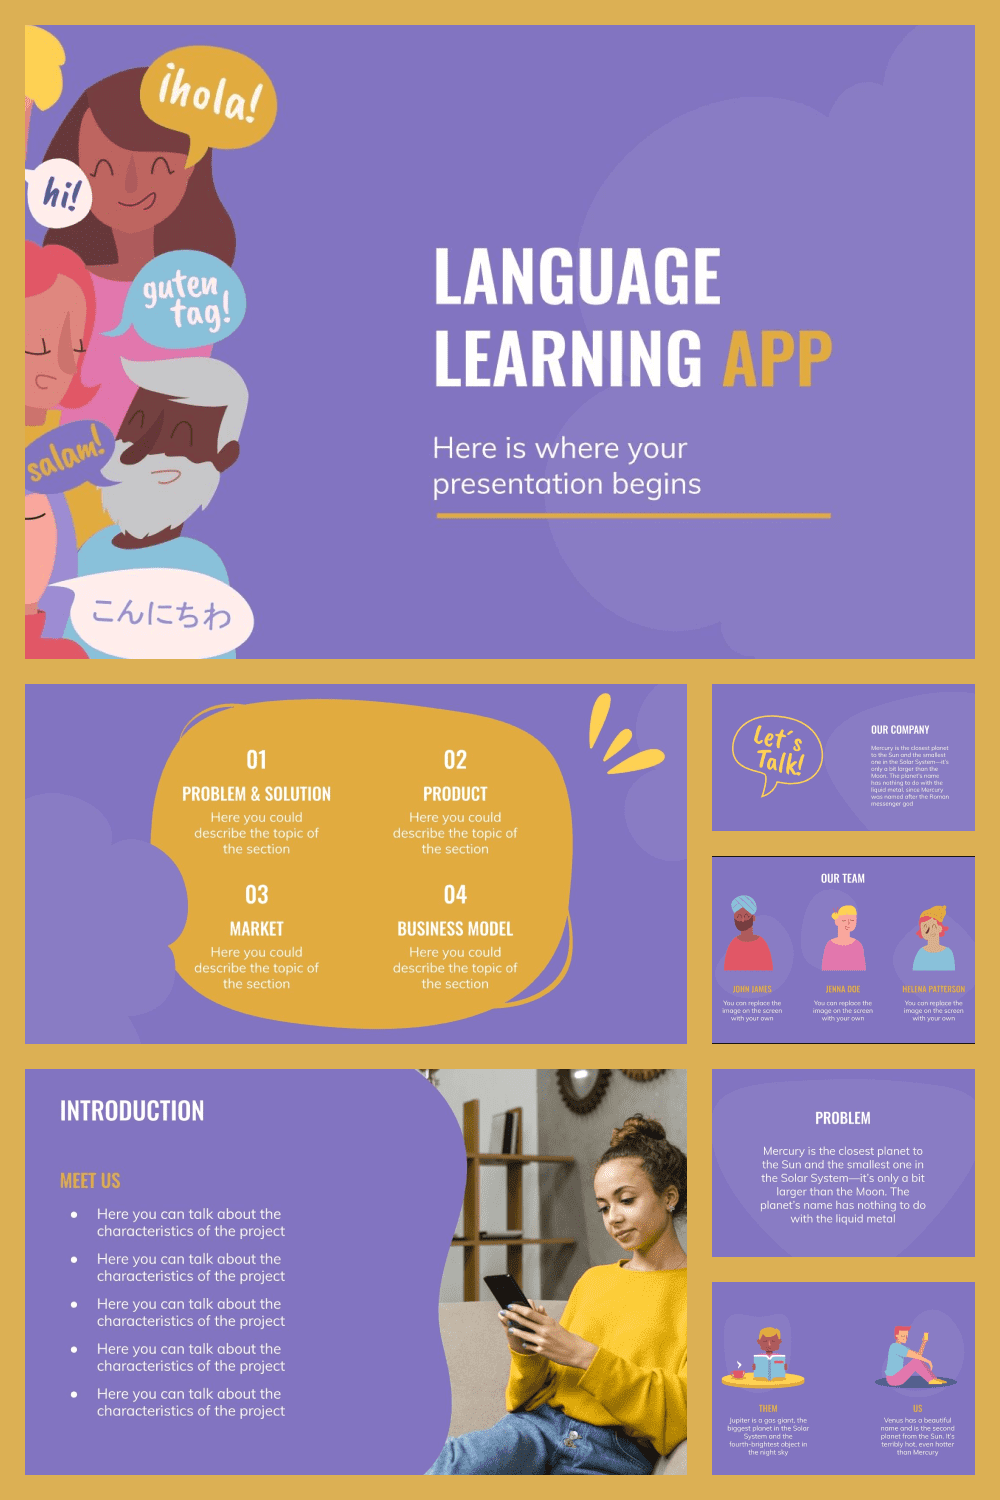 Language learning app pitch deck.